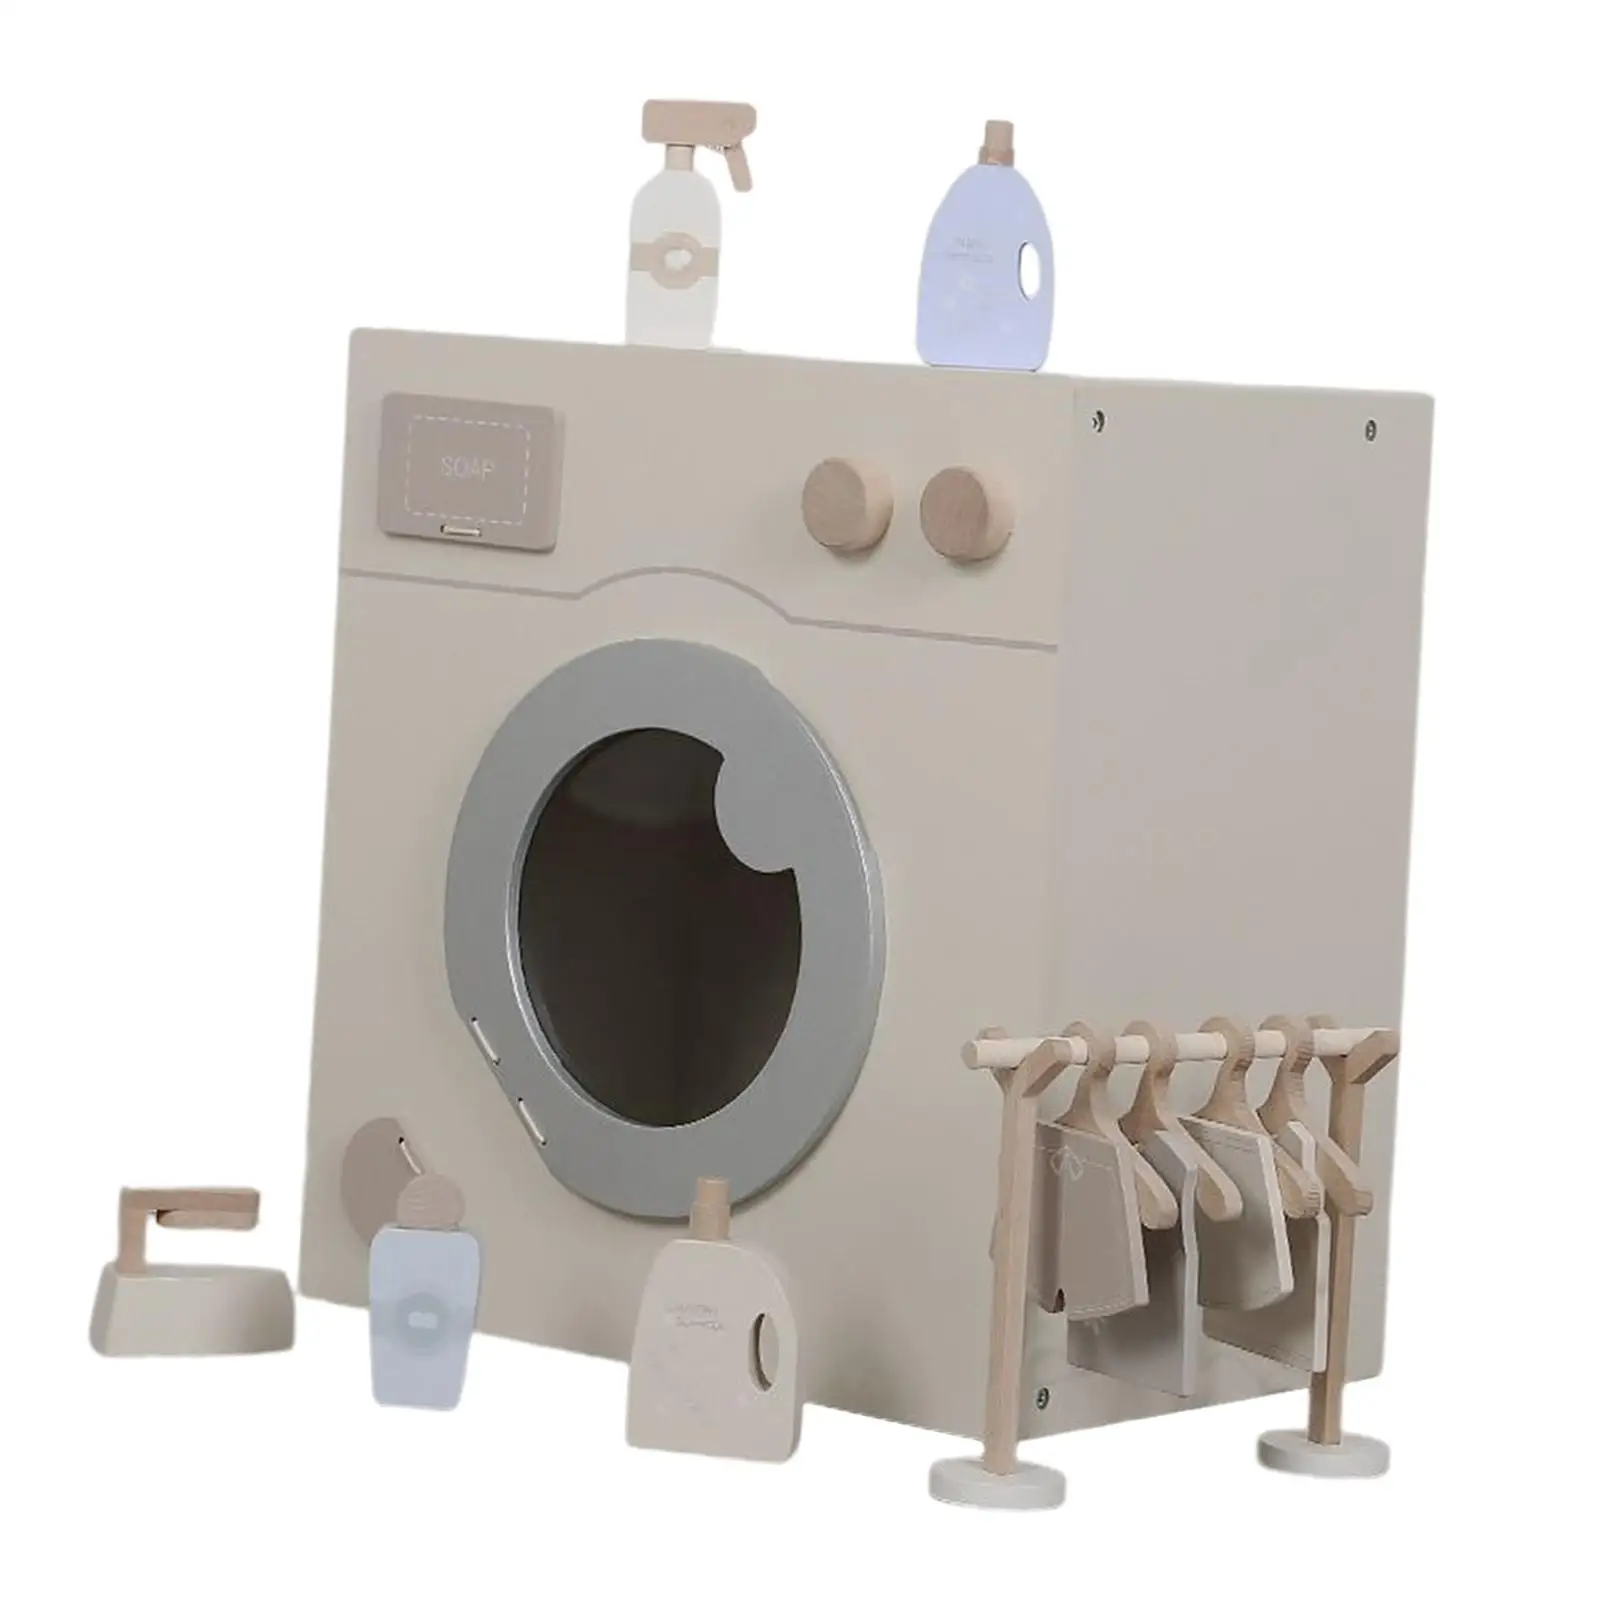 Wooden Washing Machine Set with Accessories Laundry Set Interactive Toy Appliance Realistic Role Play Toy for Toddlers Gift Kids